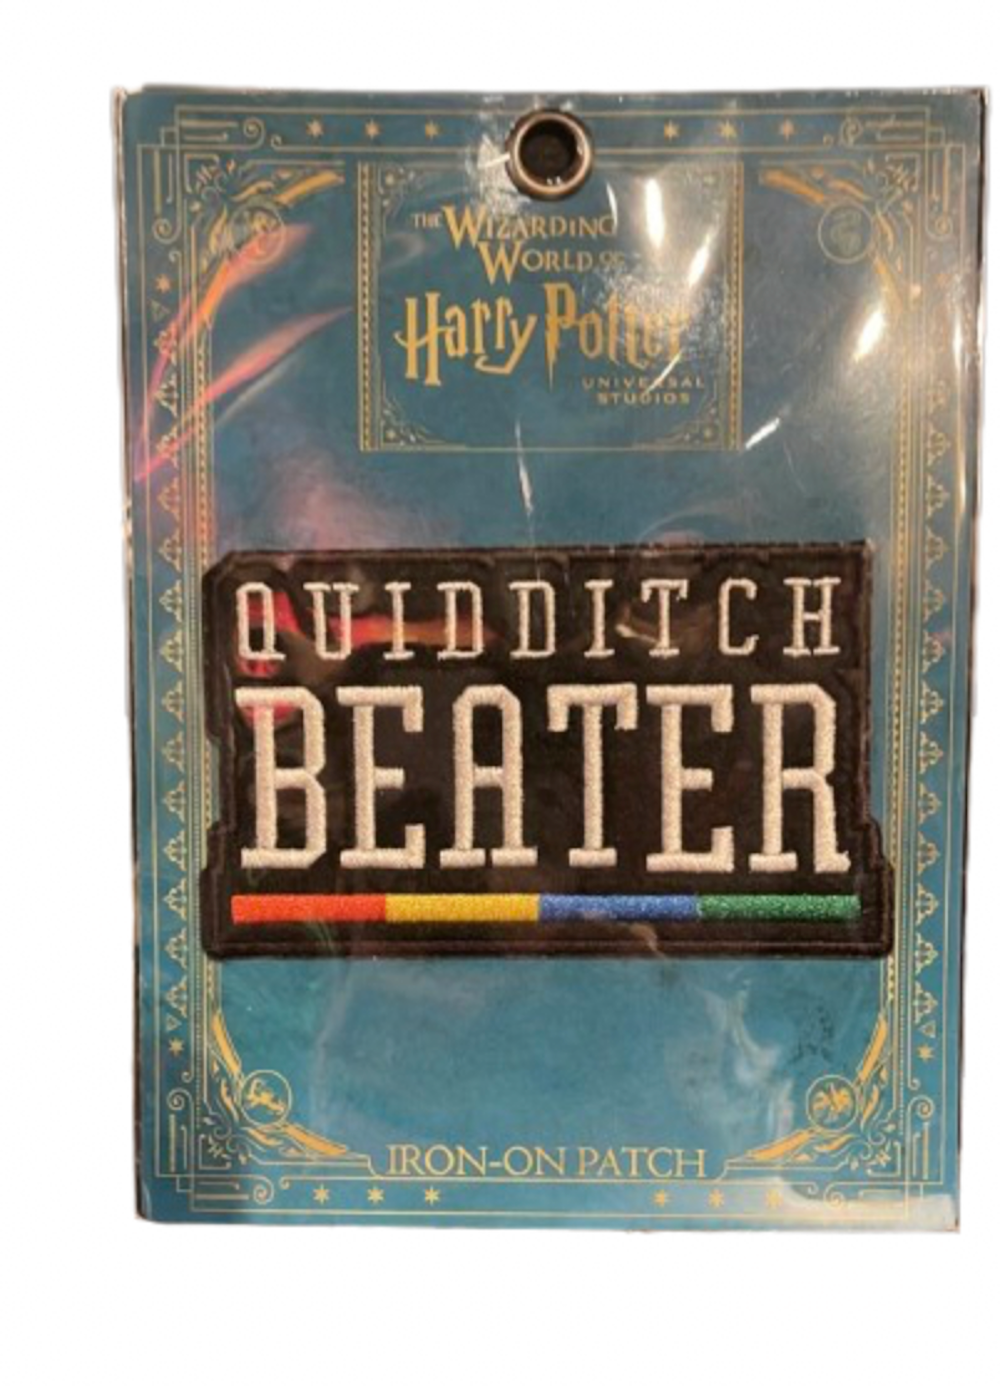 Universal Studios Harry Potter Quidditch Beater Iron on Patch New with Card